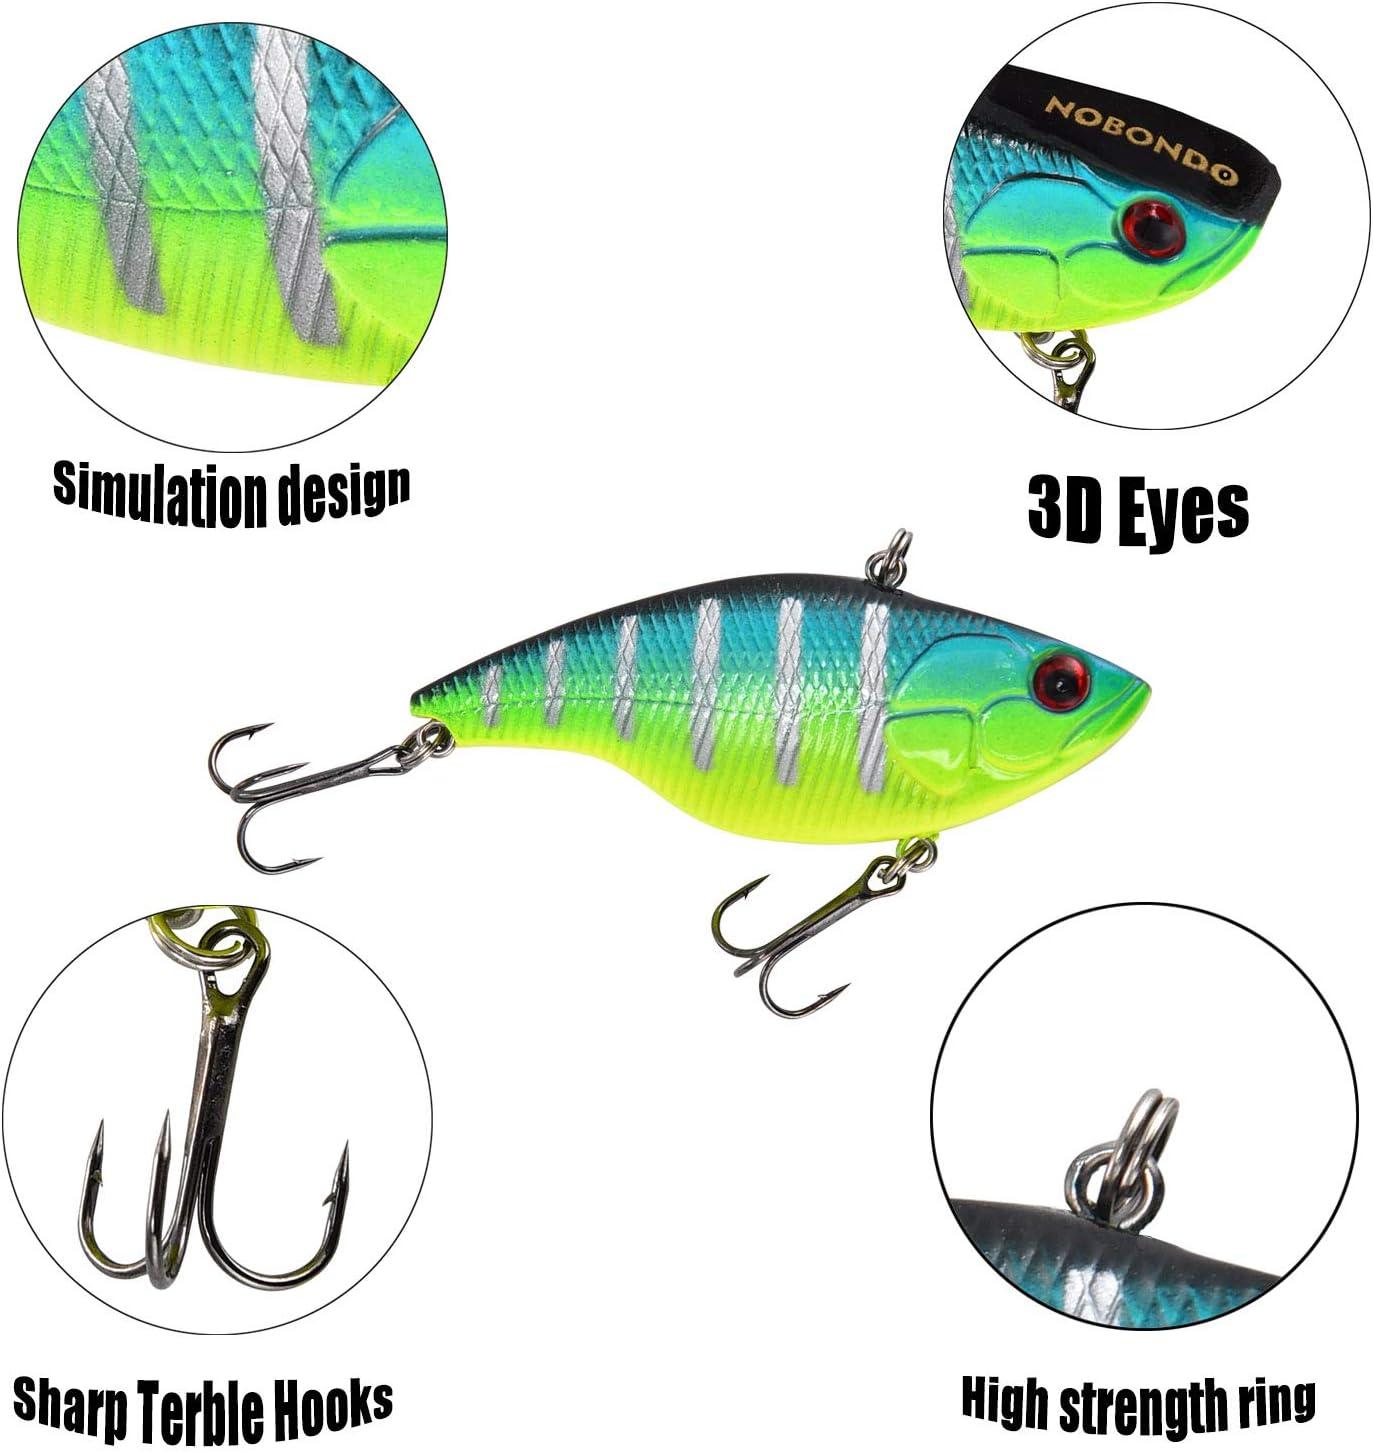 NOBONDO 10 PCS Lipless Crankbait Fishing Lures for Saltwater Freshwater  with Portable Bag - 3/5 OZ VIB Lures with 3D Eyes, Sinking Vibe Crank Baits  Swimbaits Minnow for Bass Trout Catfish Pike Walleye